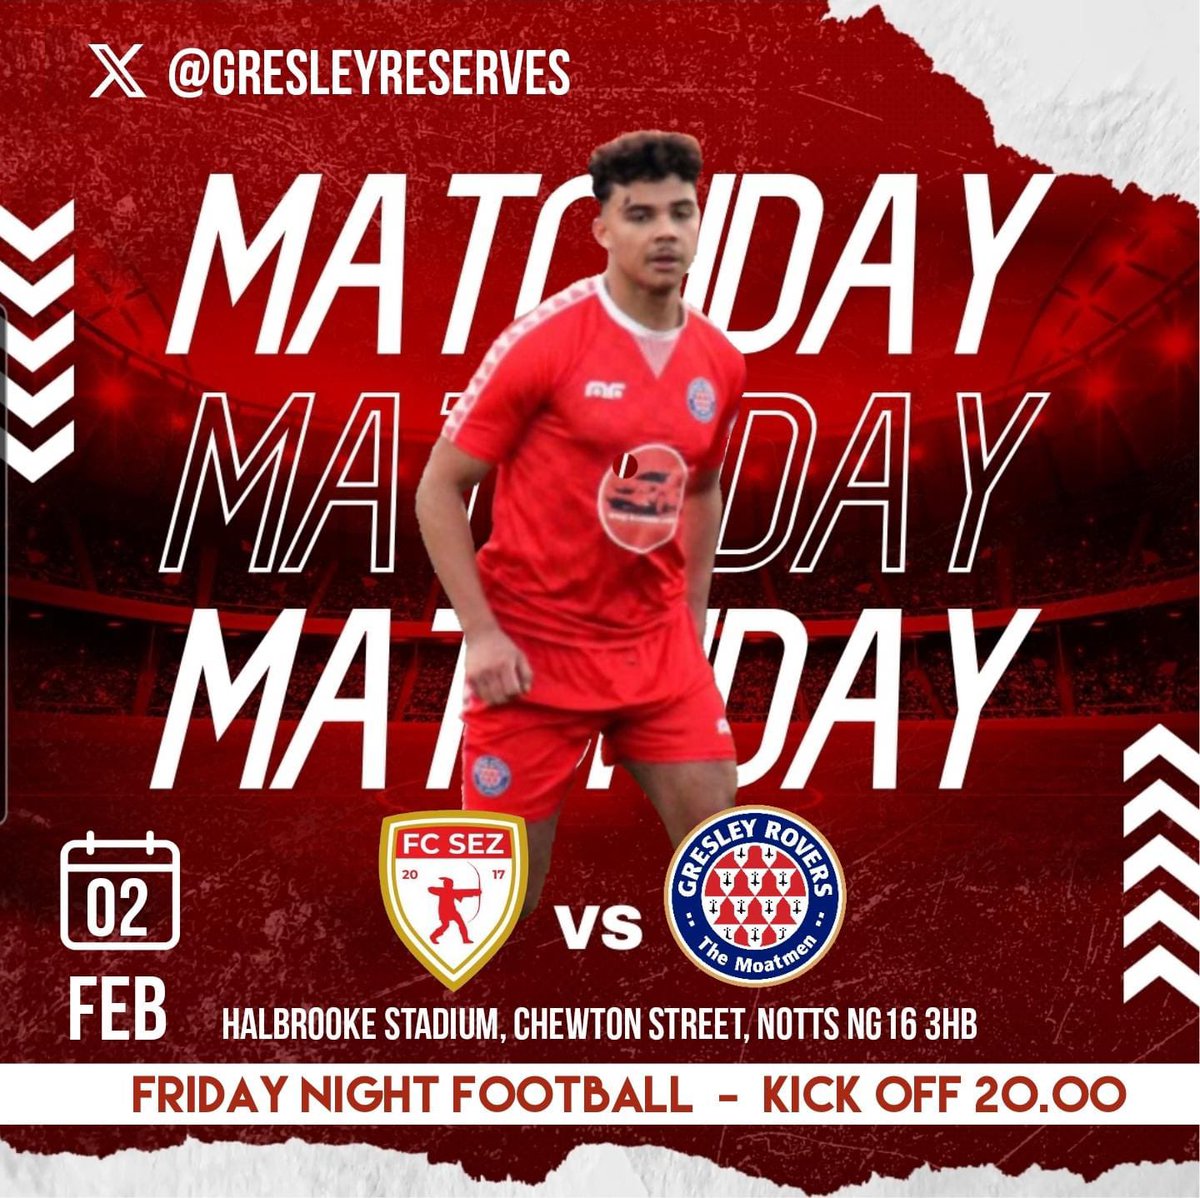 Friday night football as we travel to Eastwood to face @FCSez in a 20:00 kick off 🔴⚪️🔴 #youngmoatmen